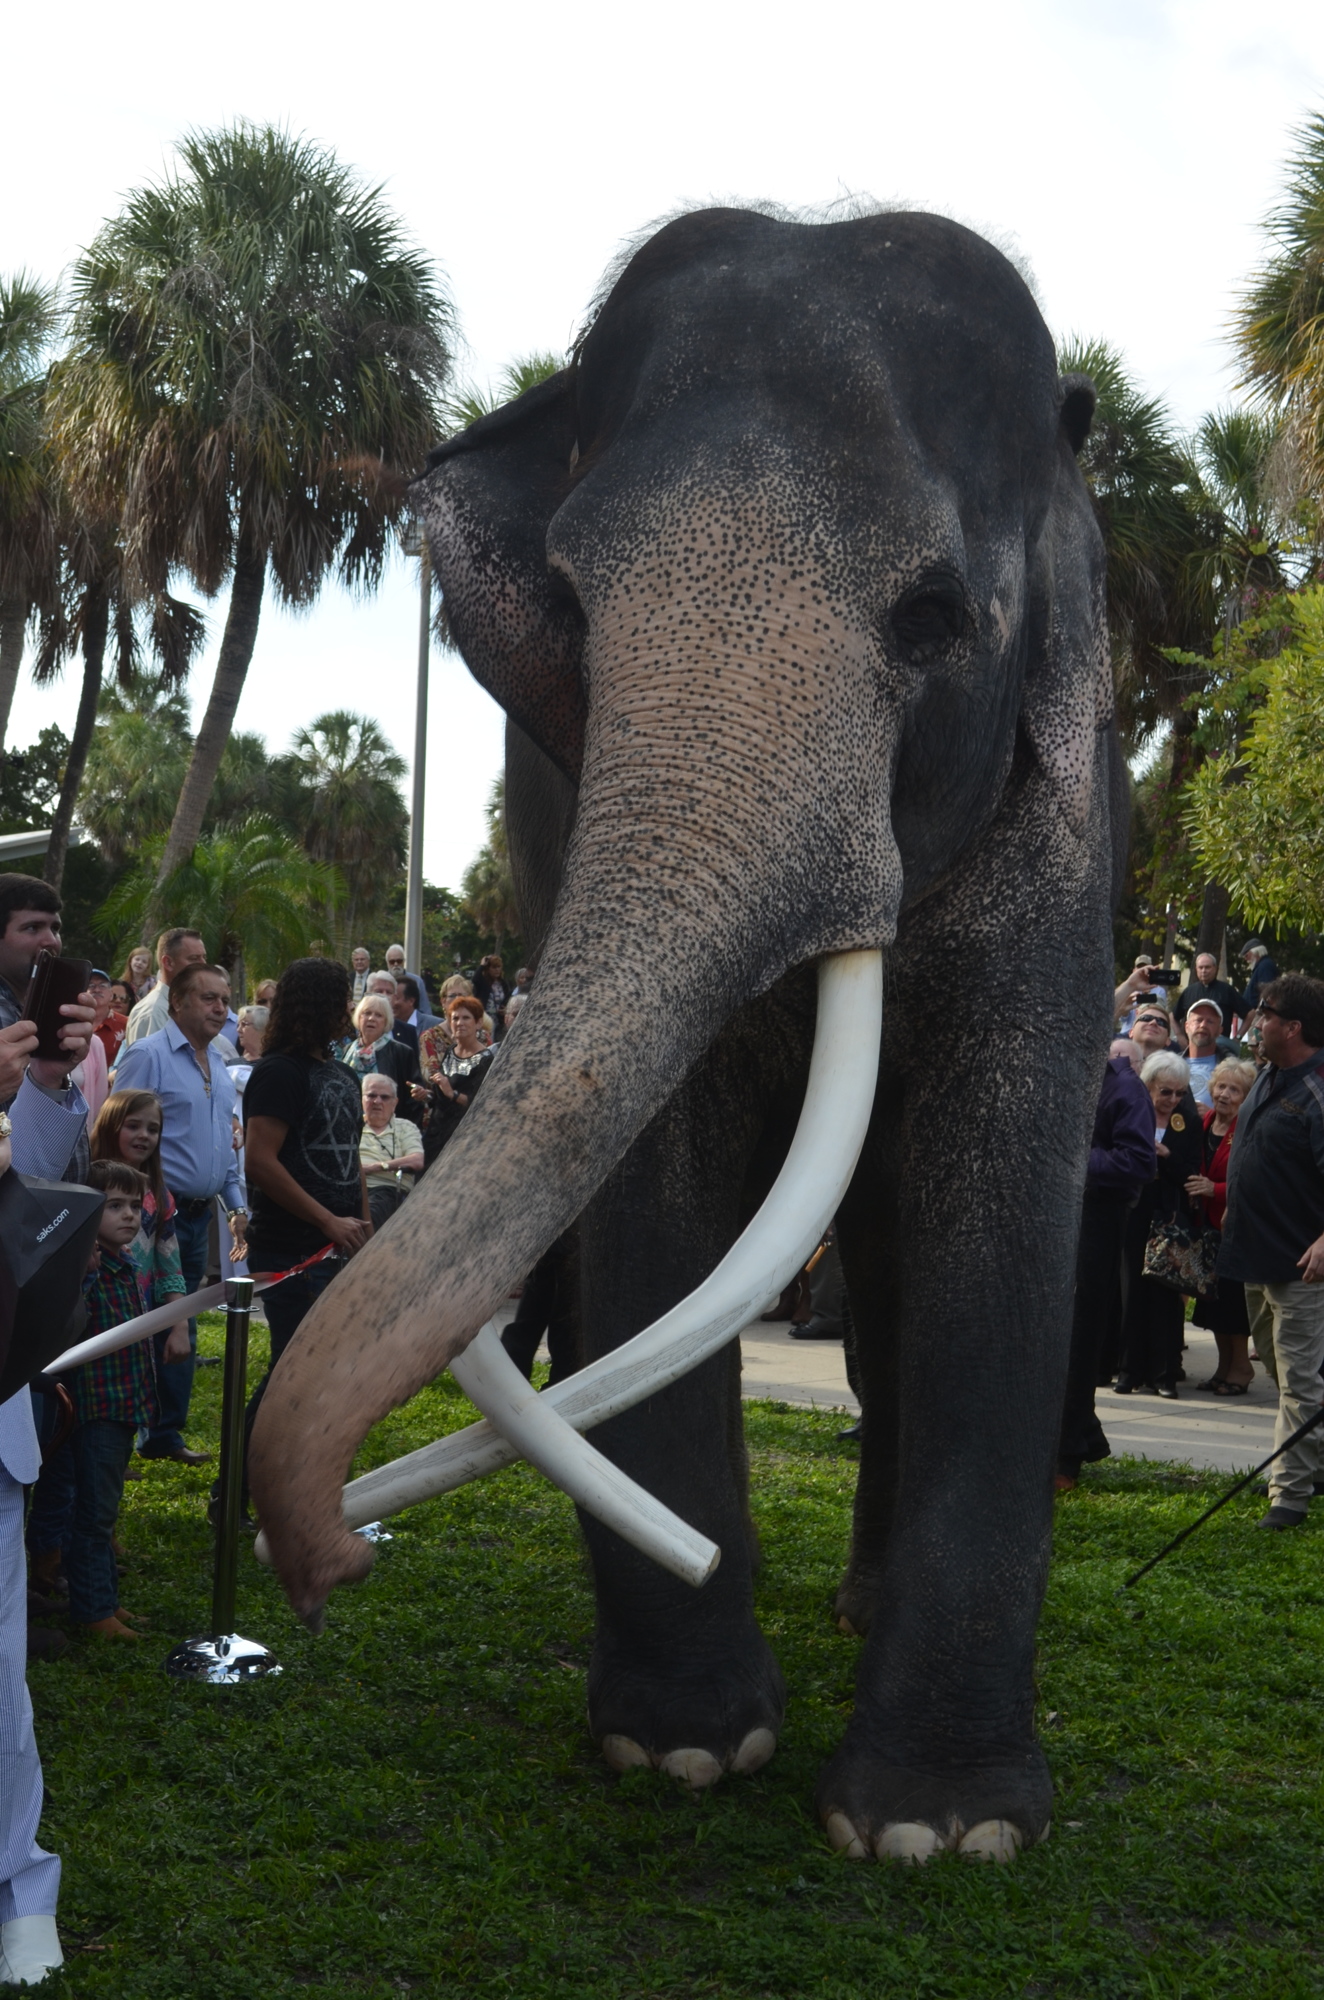 Jumbo the elephant at last year's Circus Ring of Fame